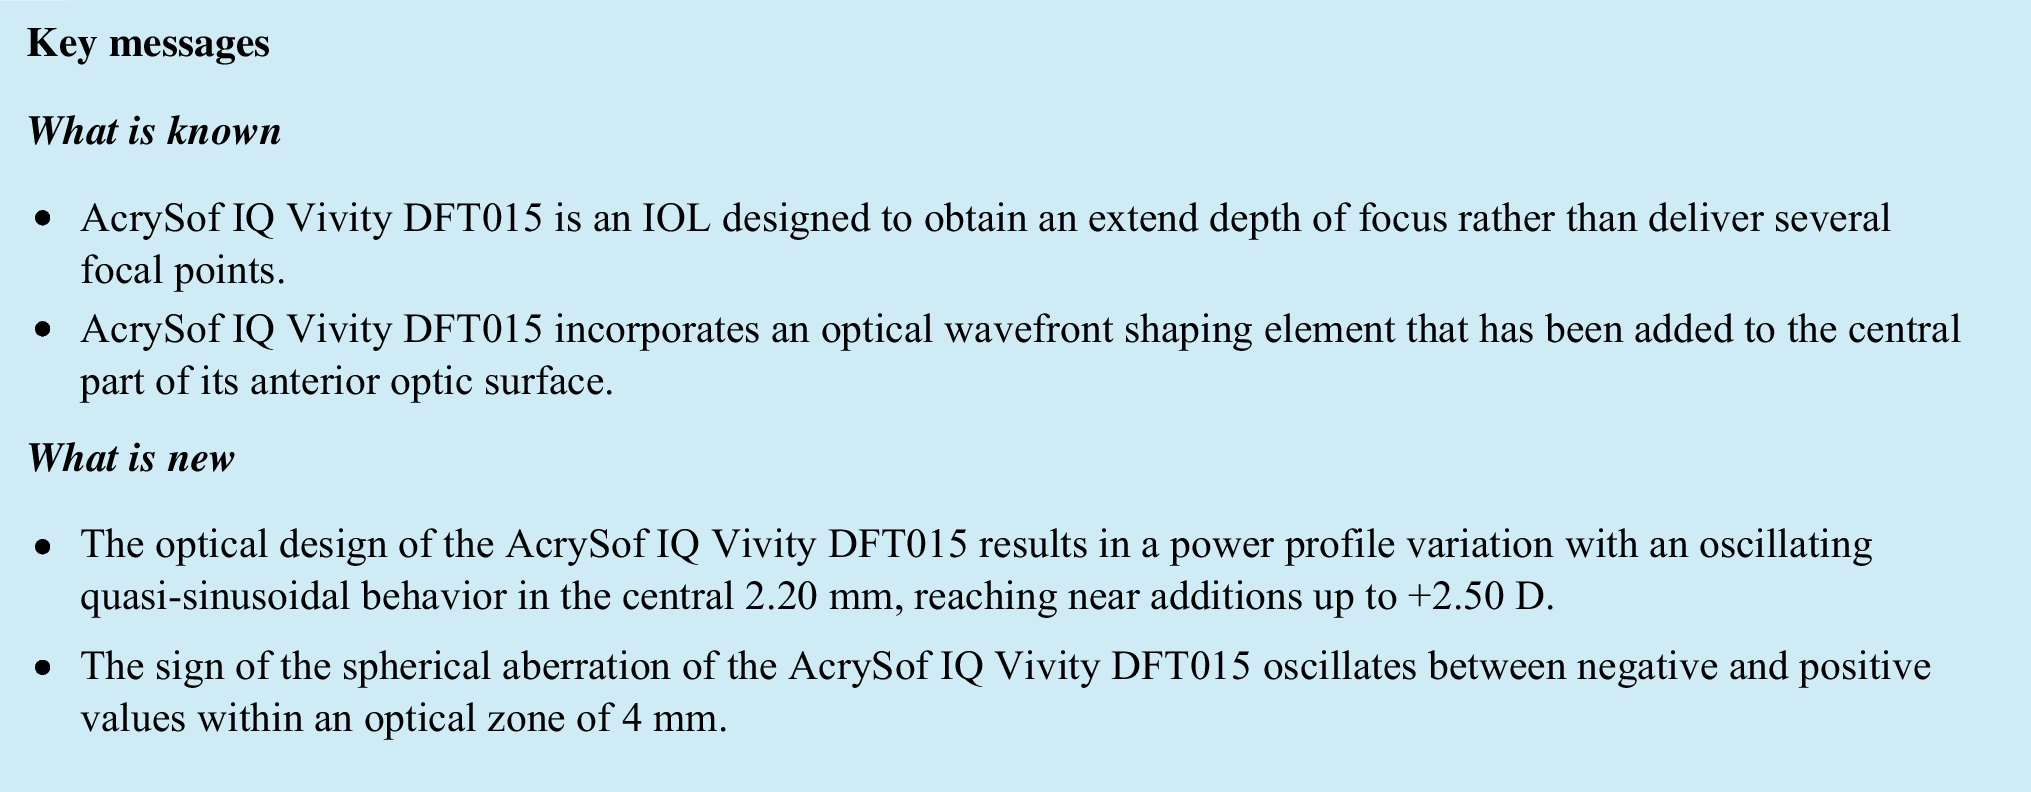 Optical power profiles and aberrations of a non-diffractive wavefront-shaping extended depth of focus intraocular lens